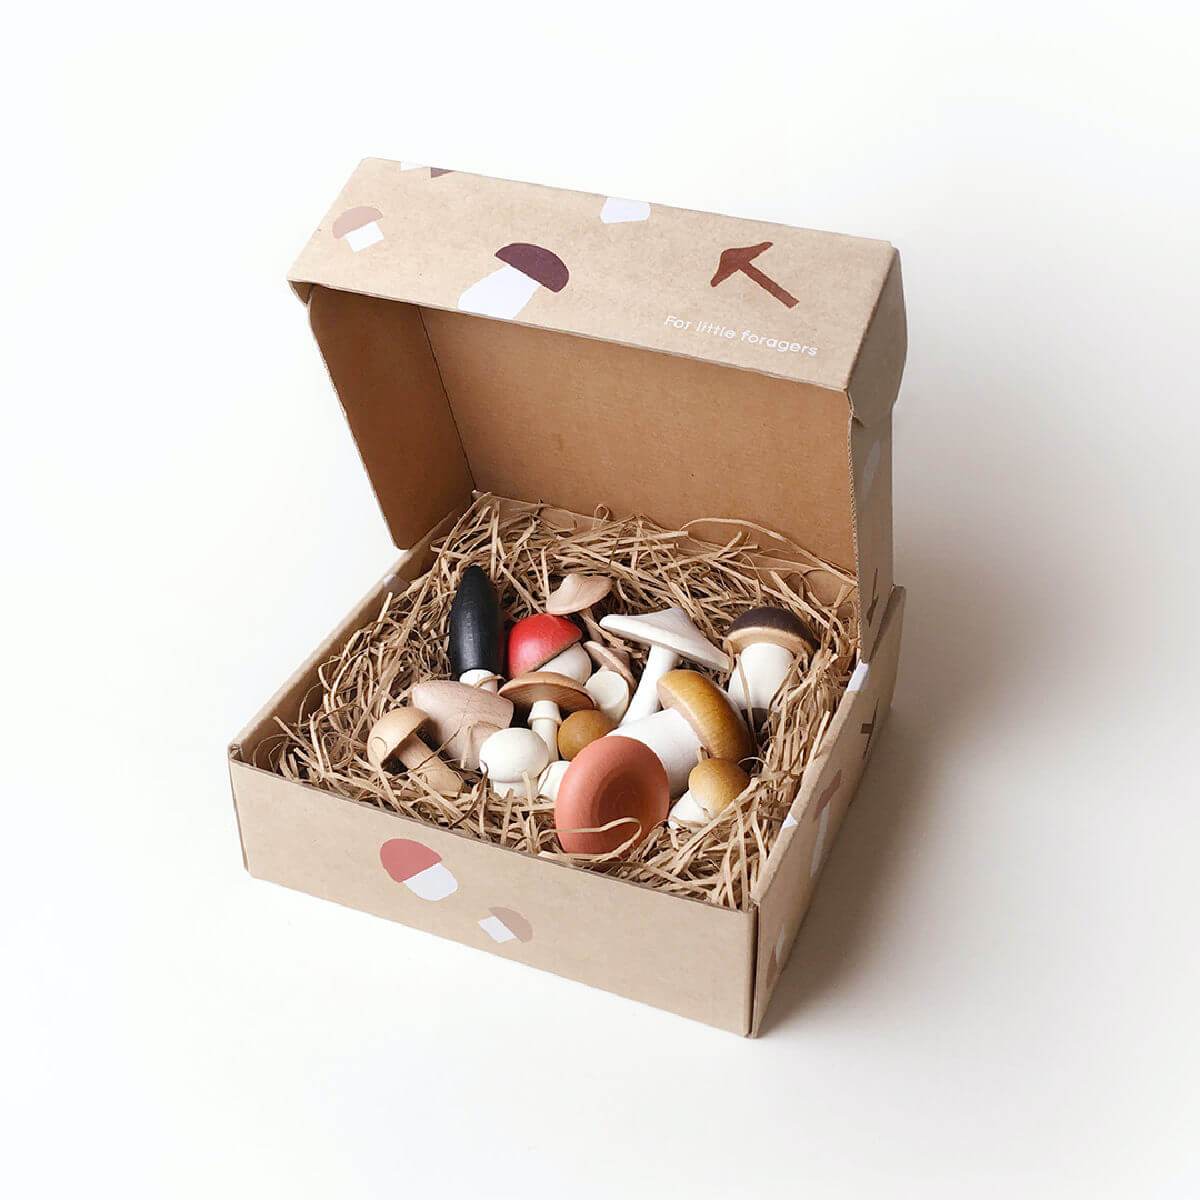 moon picnic forest mushrooms in a box wooden education toy